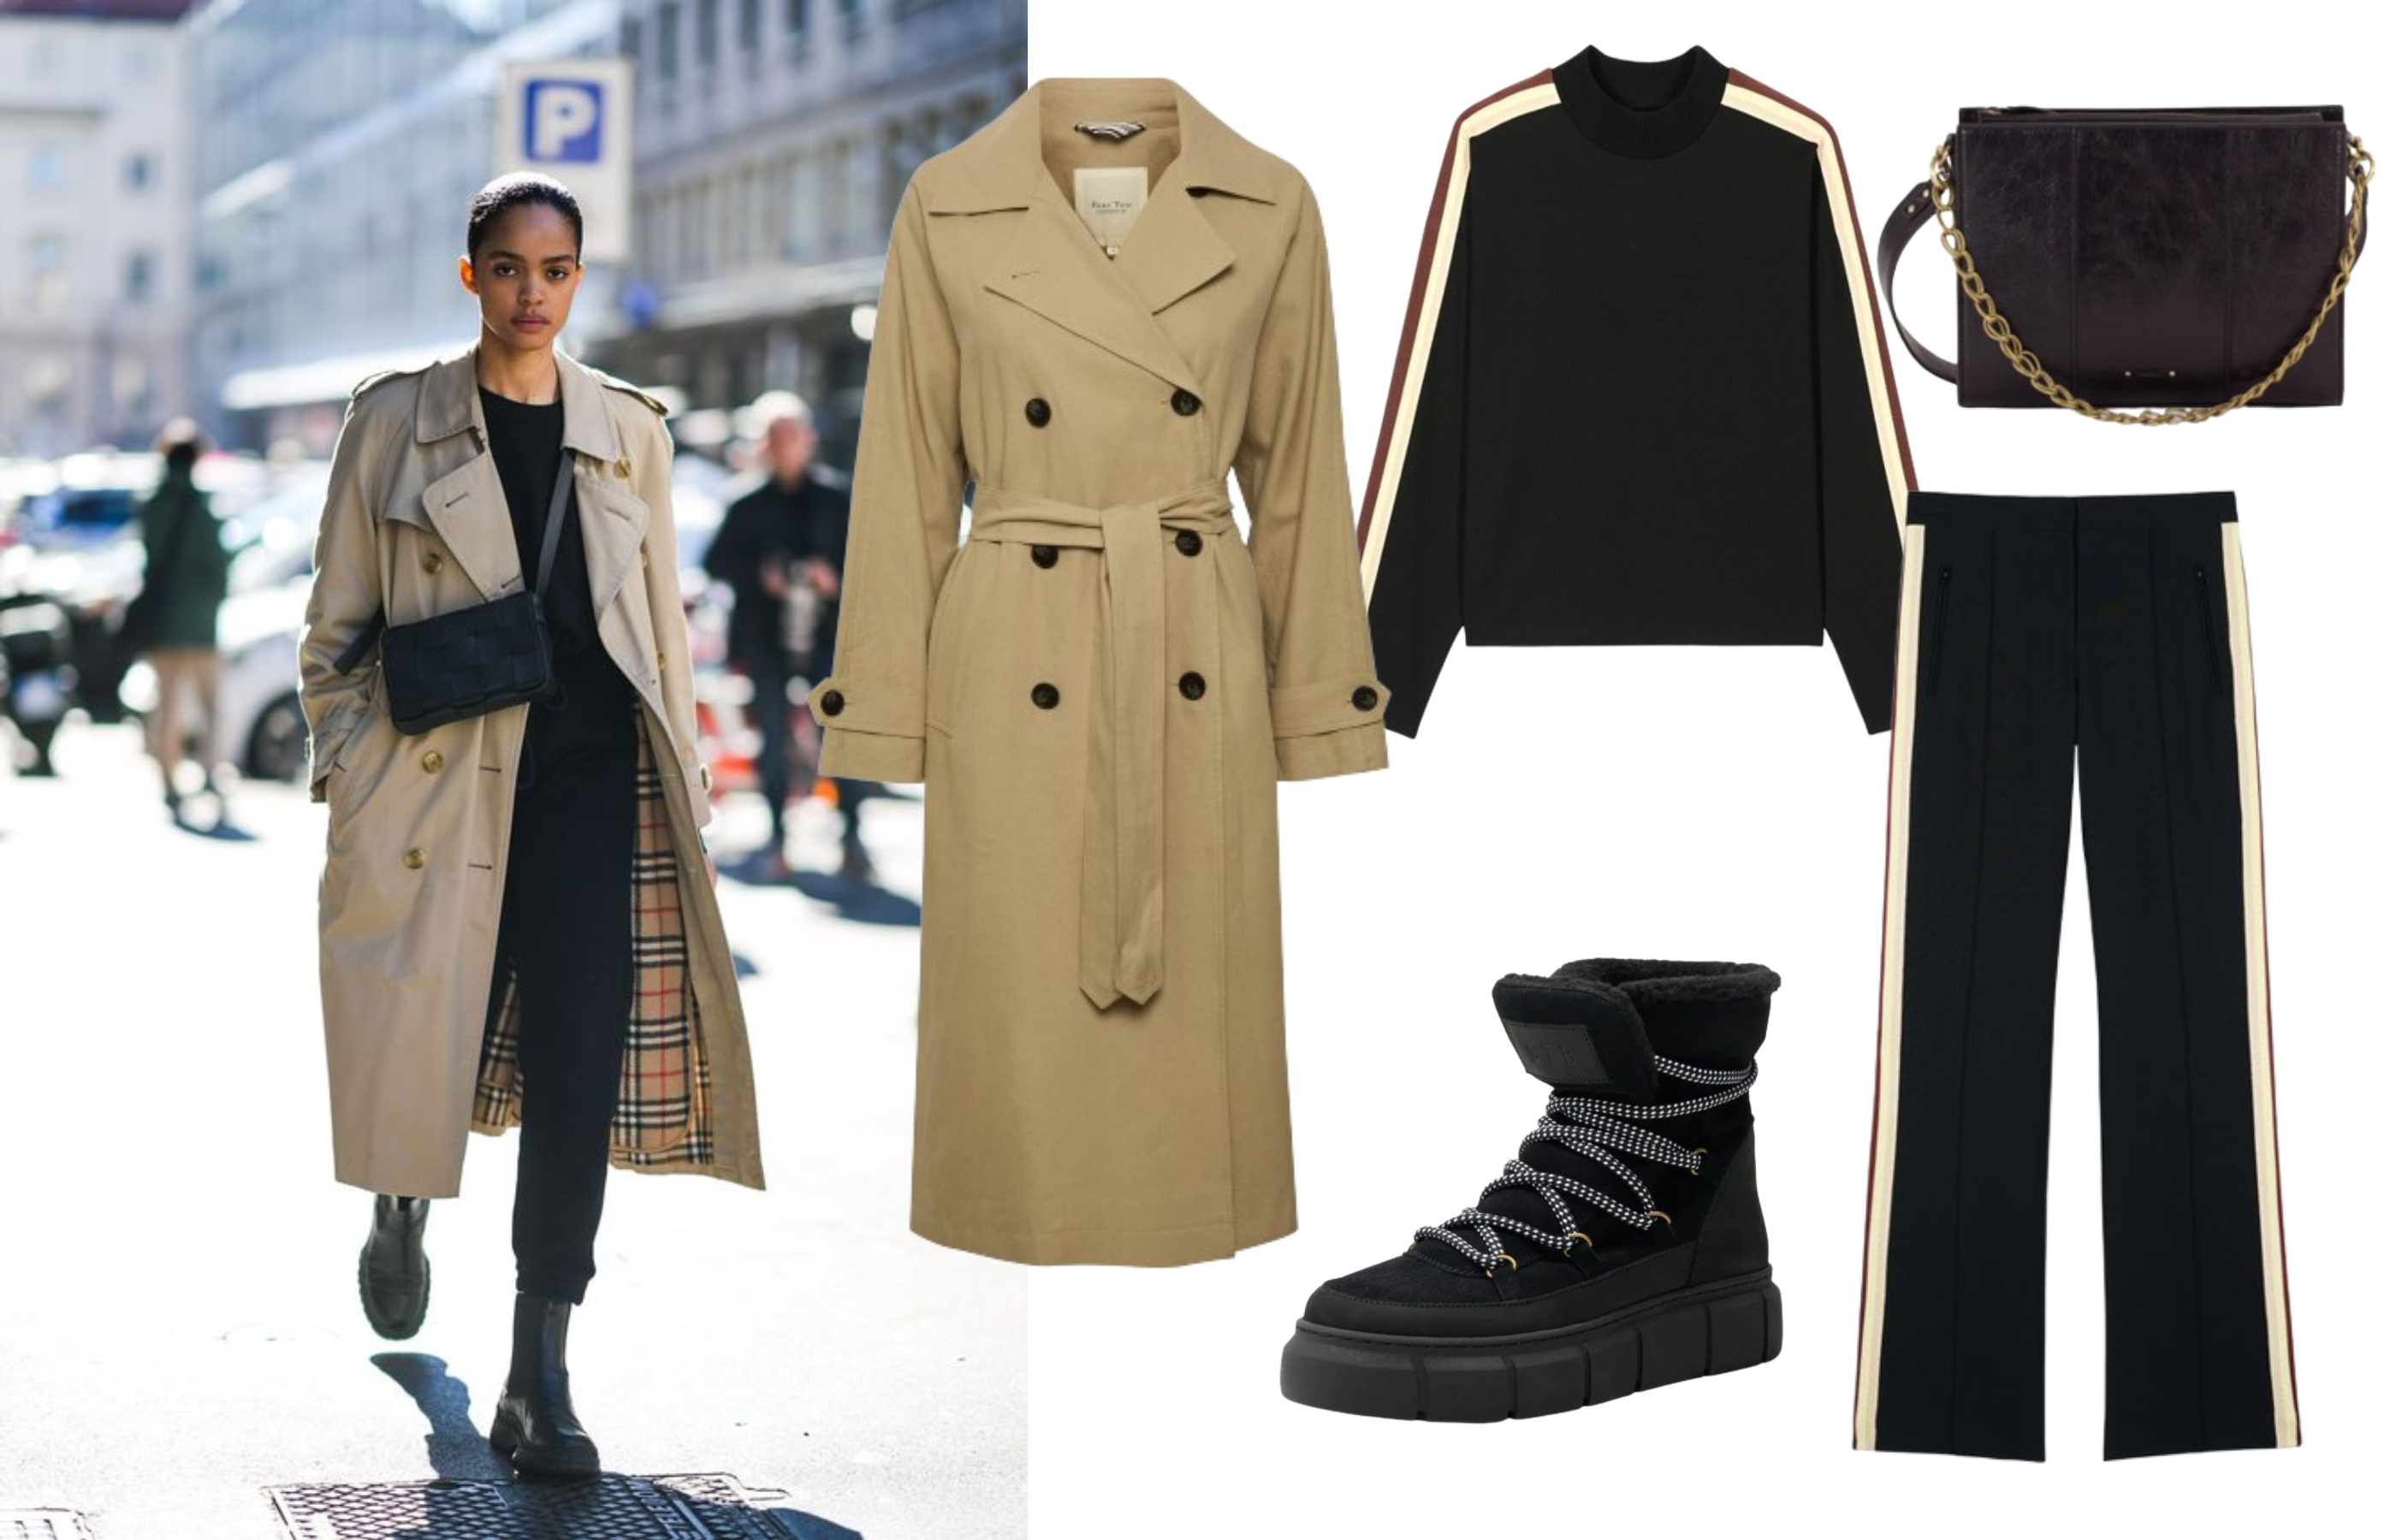 Model Inspired look - wearing a trench coat over a co-ord set and with boots